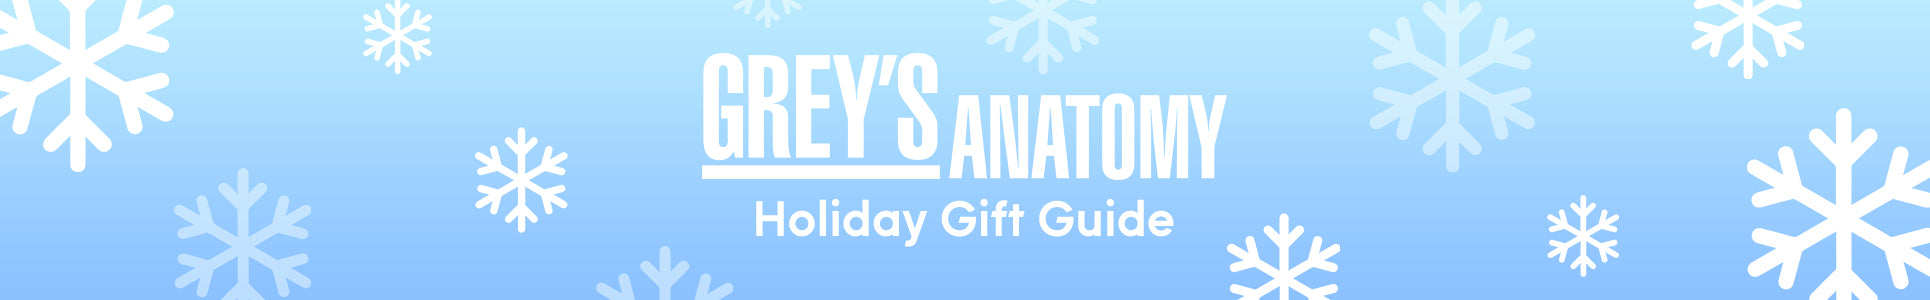 Grey's Anatomy Holiday Gift Guide banner